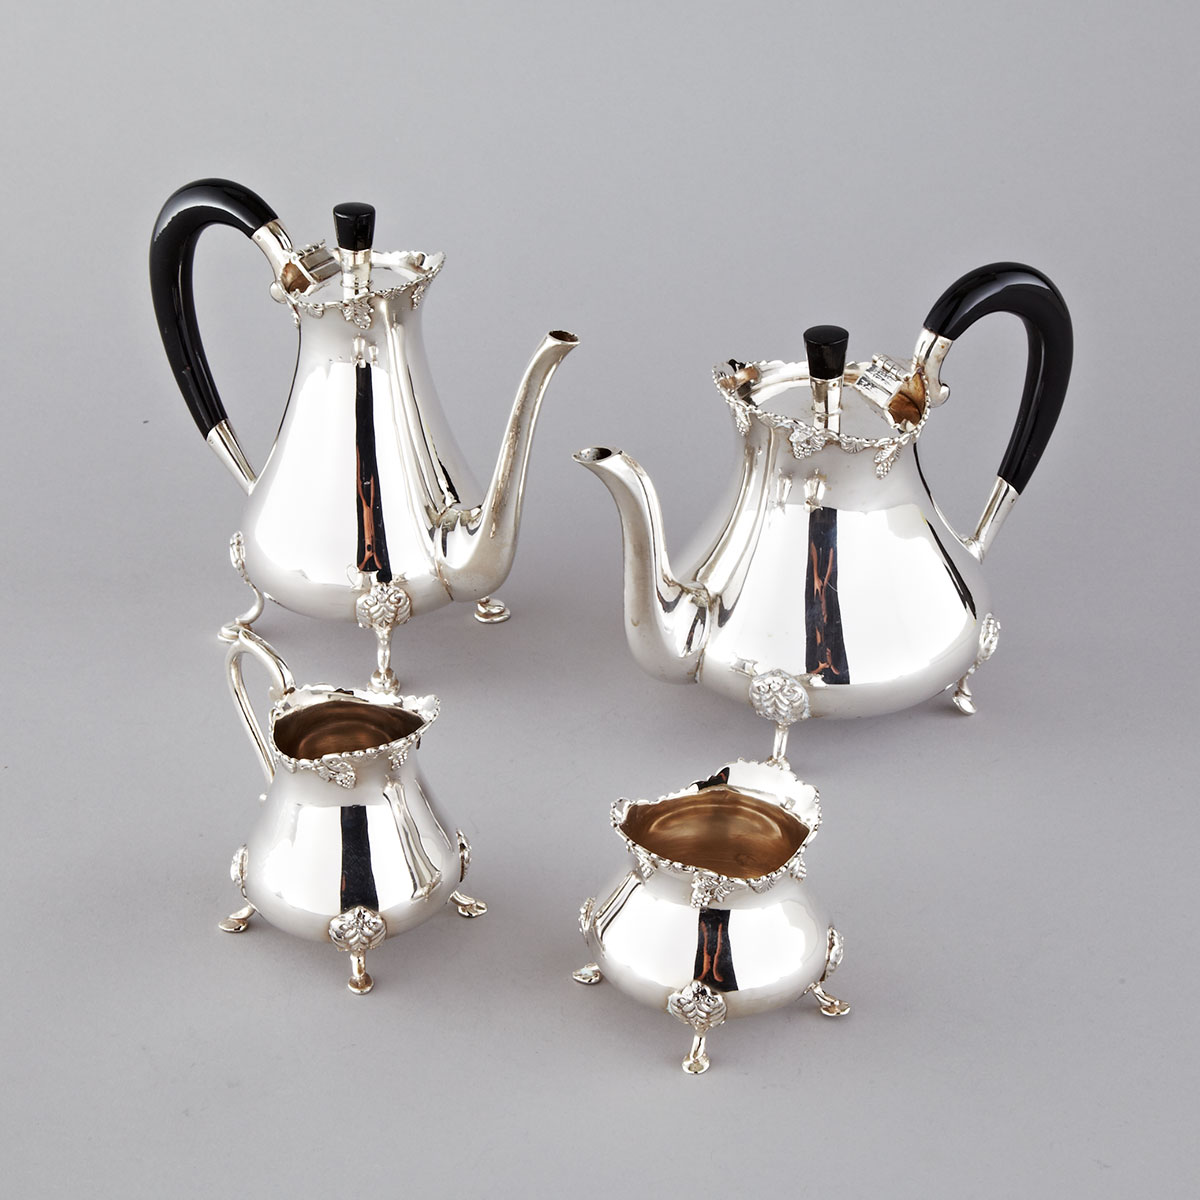 Indian Silver Tea and Coffee Service, 20th century